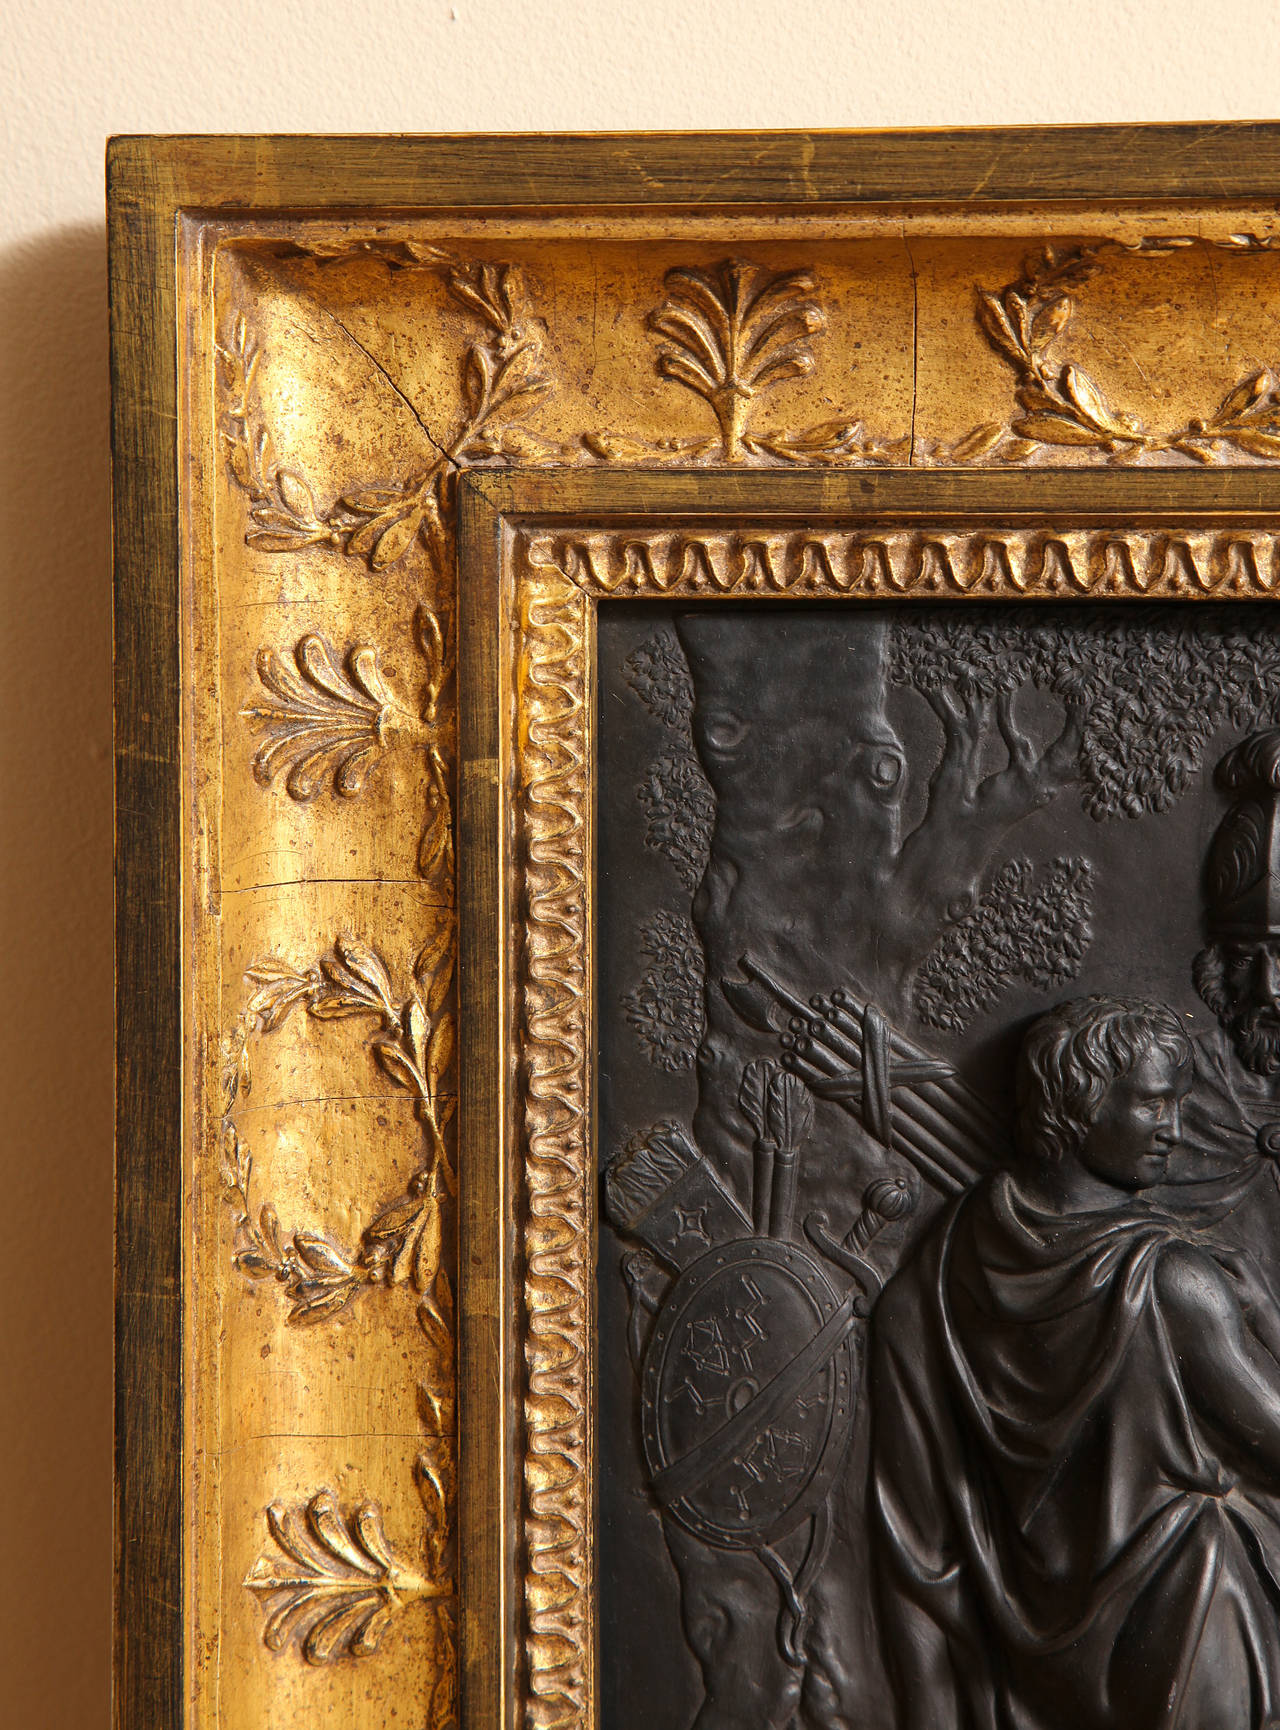 A black basalt Wedgwood plaque from the estate of Bill Blass depicting a procession of Classical figures after battle in low relief; now framed with carved and gilt wood Empire design, rectangular custom carved in gilt wood, Empire design;